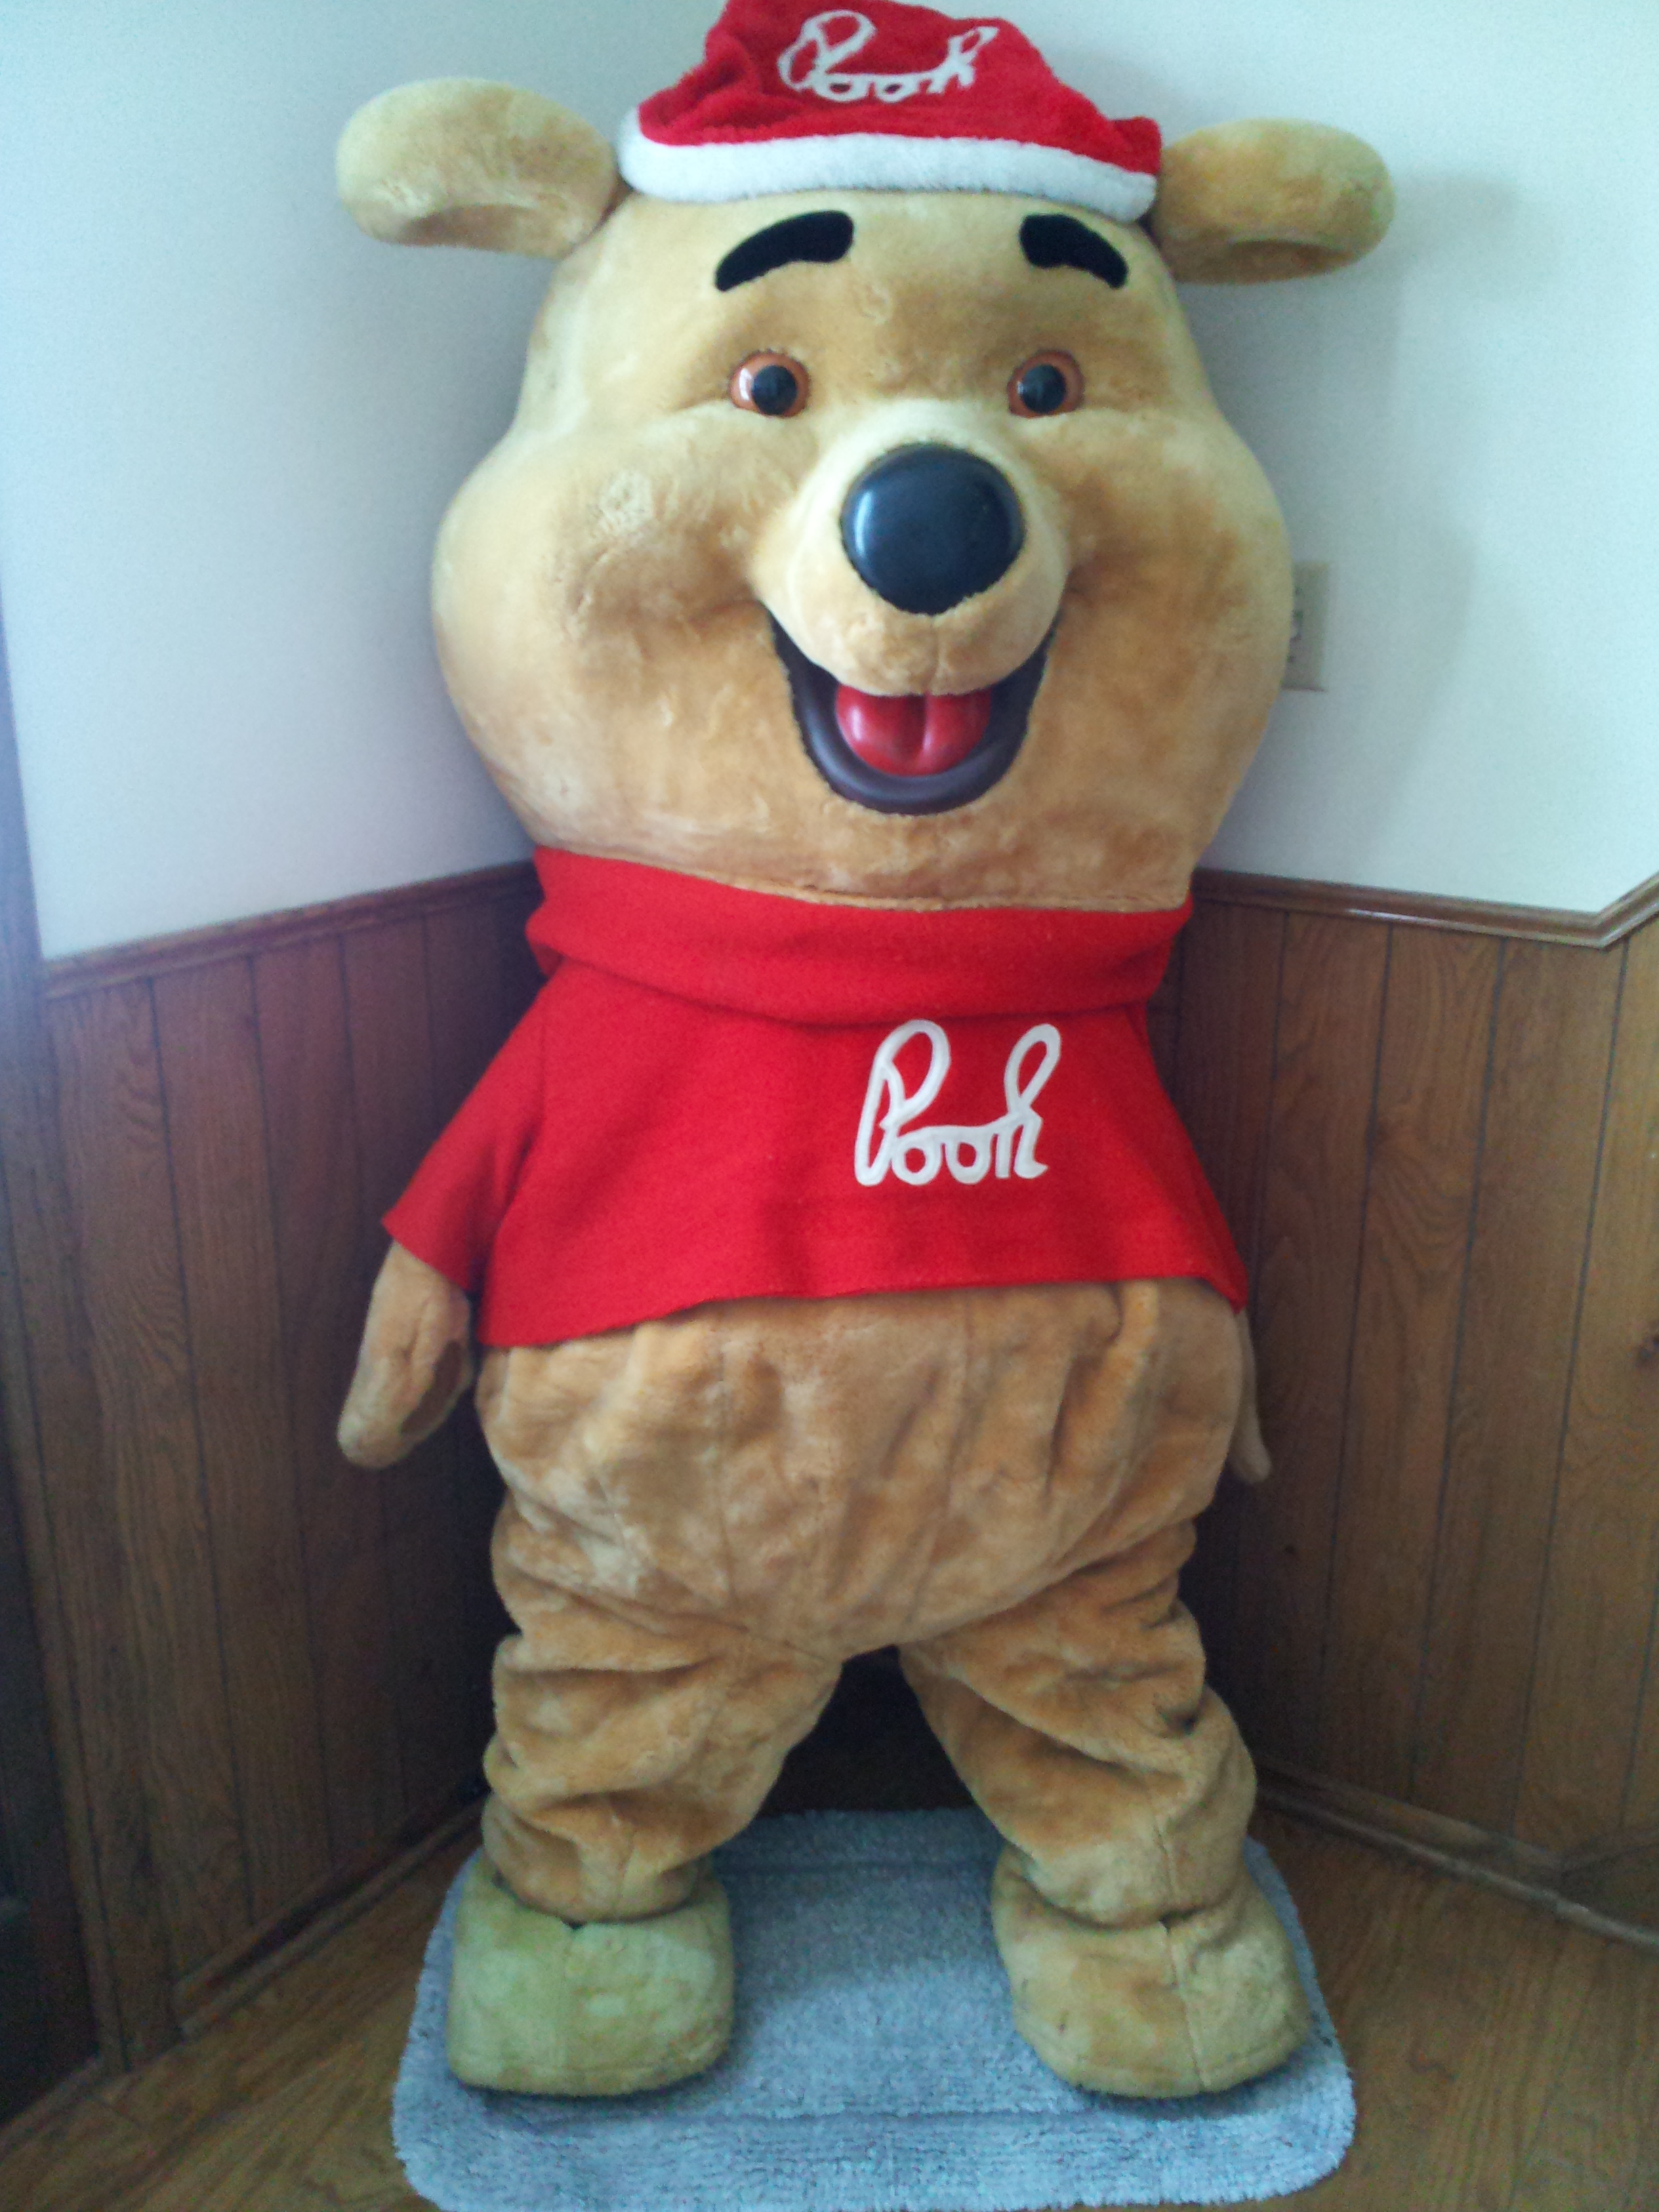 Pooh costume worn at Disney World, Disneyland and Sears from 1989 until 2000